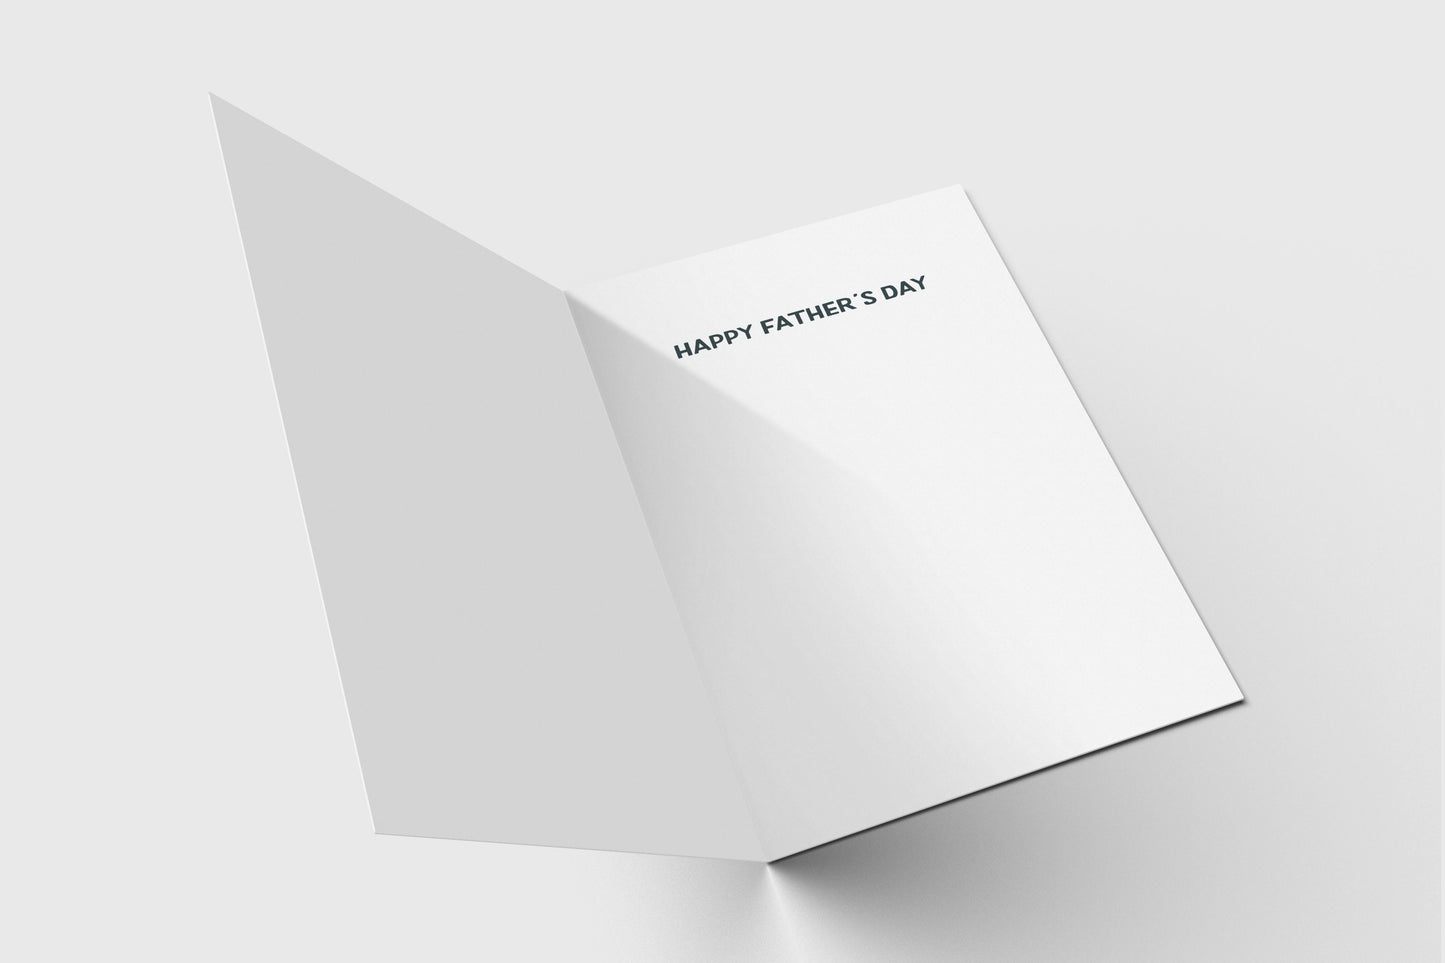 Father's Day Card | For Someone Like A Dad - For Non-Biological Dad - For Friend - Wishing You a Happy Father's Day - Heartfelt - Gift Ideas